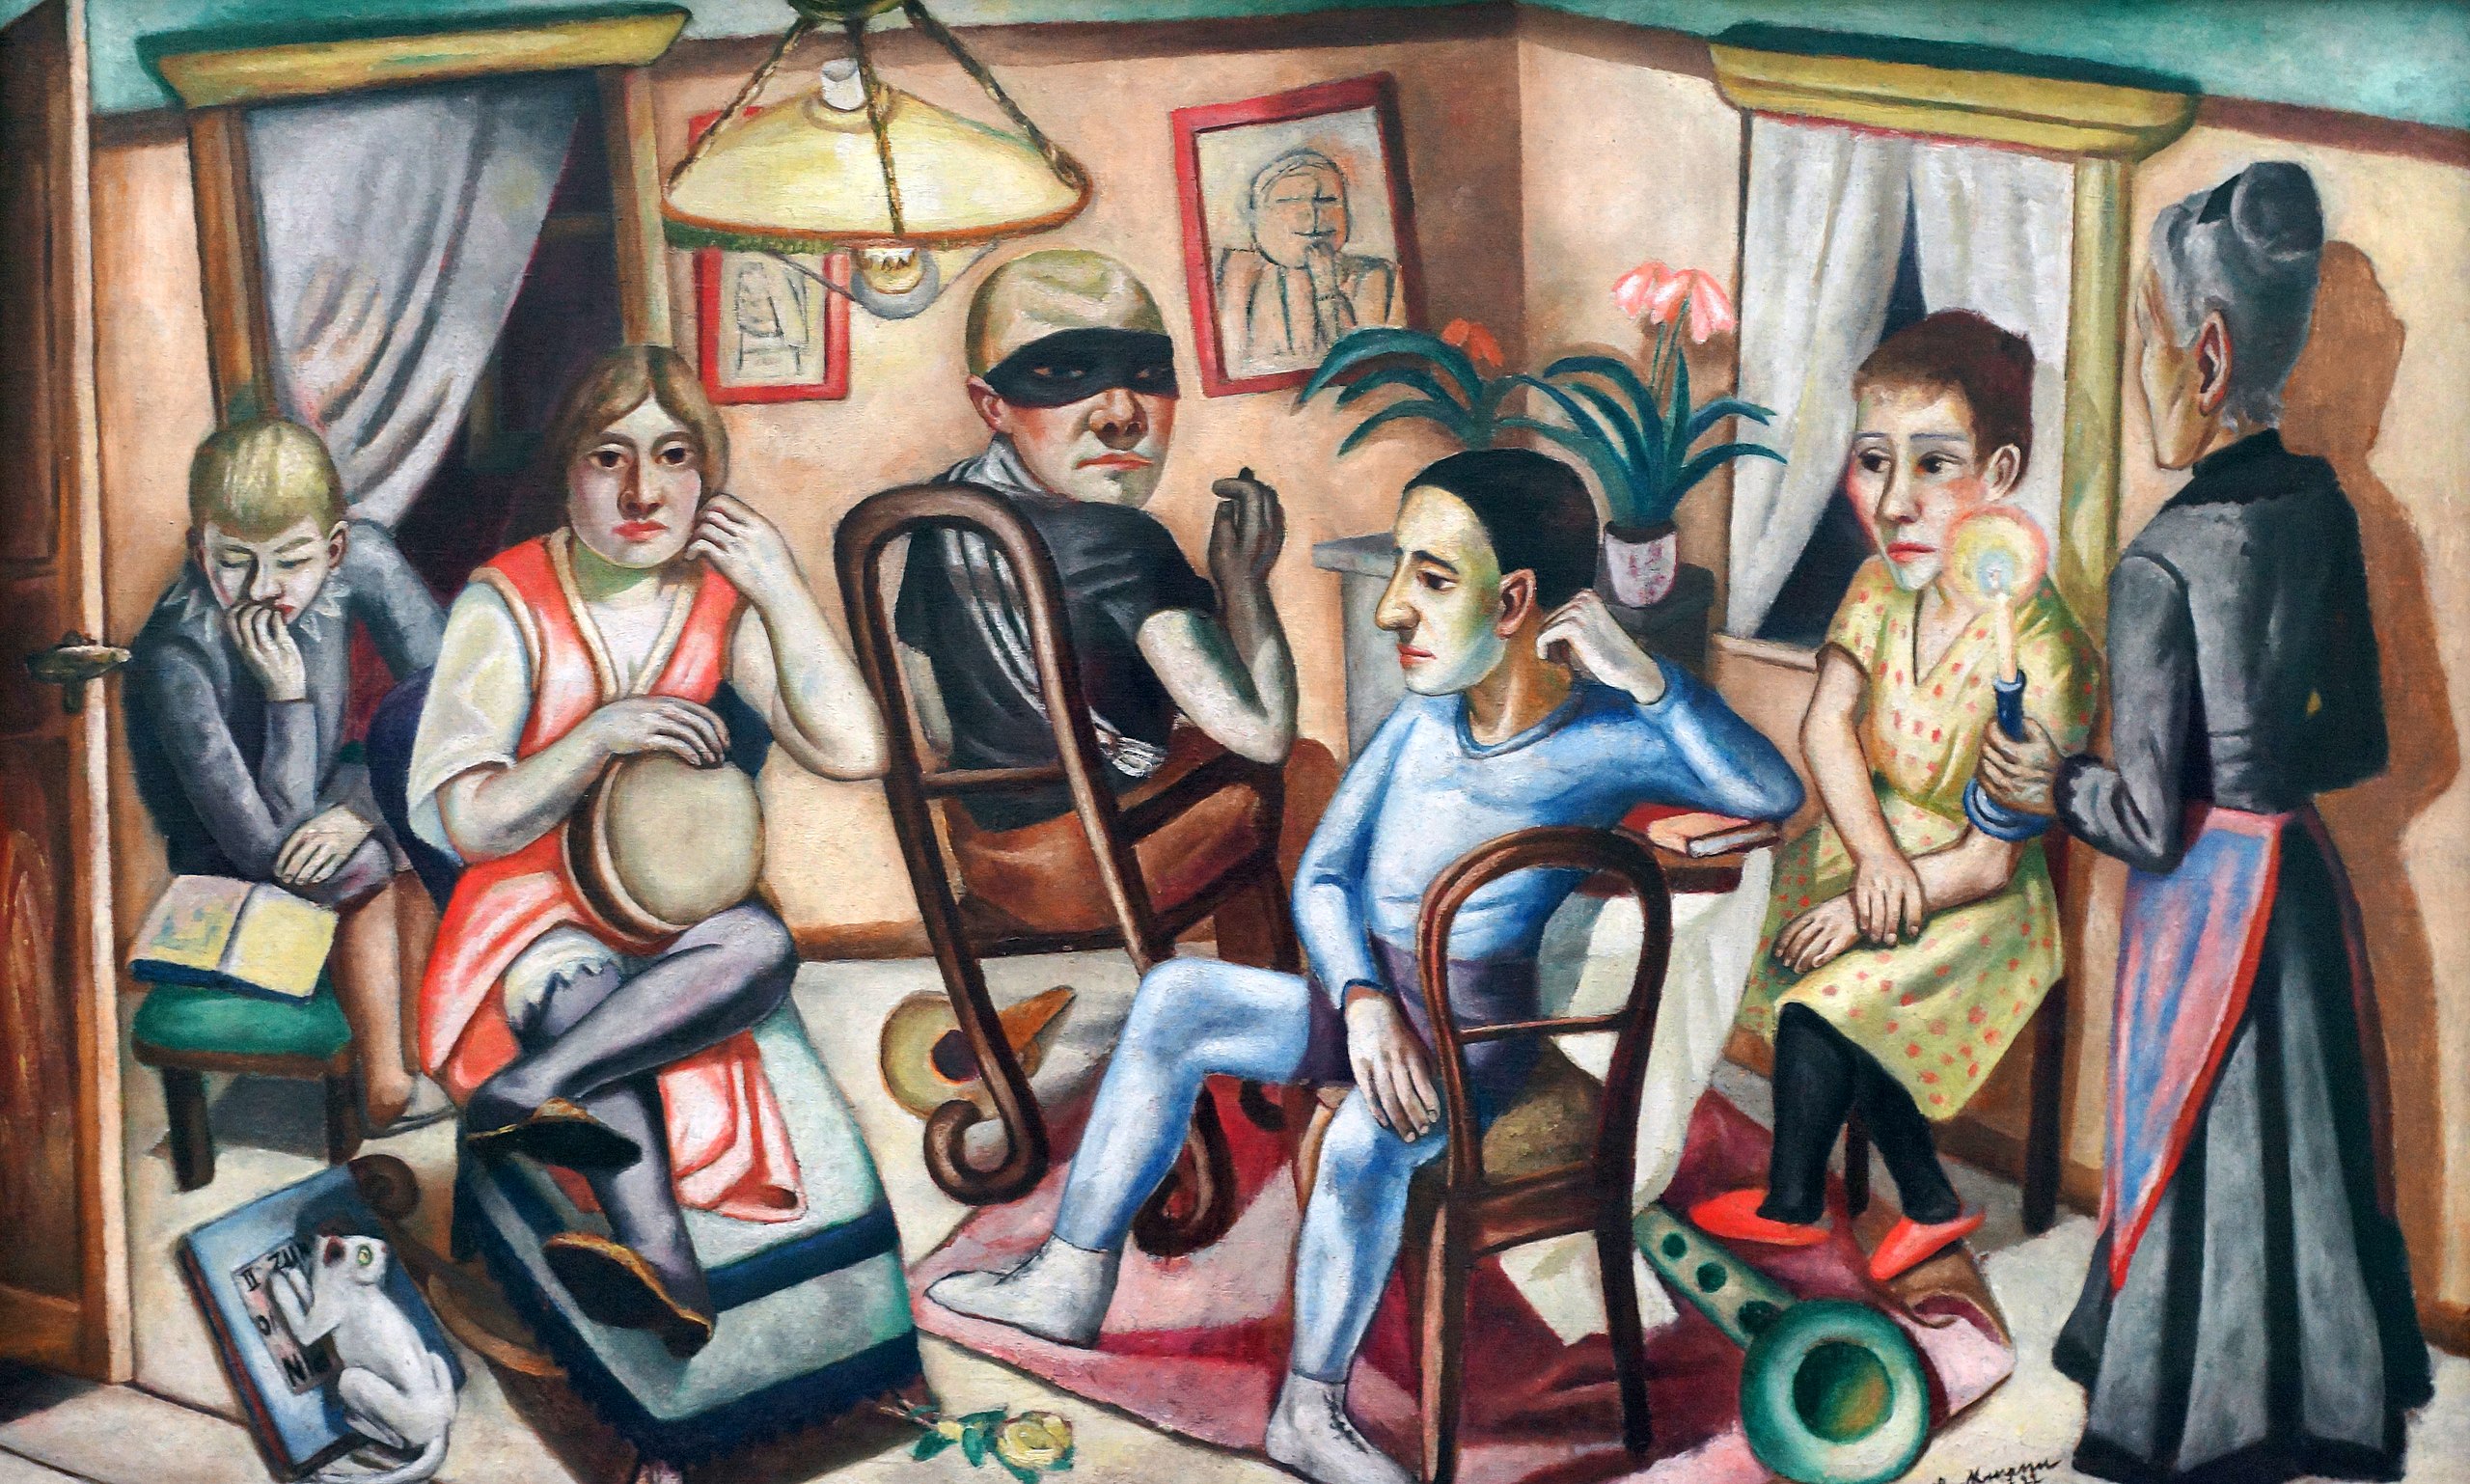 ‘Before the masquerade ball, 1922’ by Max Beckmann, a Weimar era artist branded ‘degenerate’ by the Nazis. Bavarian State Painting Collections - Modern Art Collection in the Pinakothek der Moderne Munich (CC BY-SA 4.0).